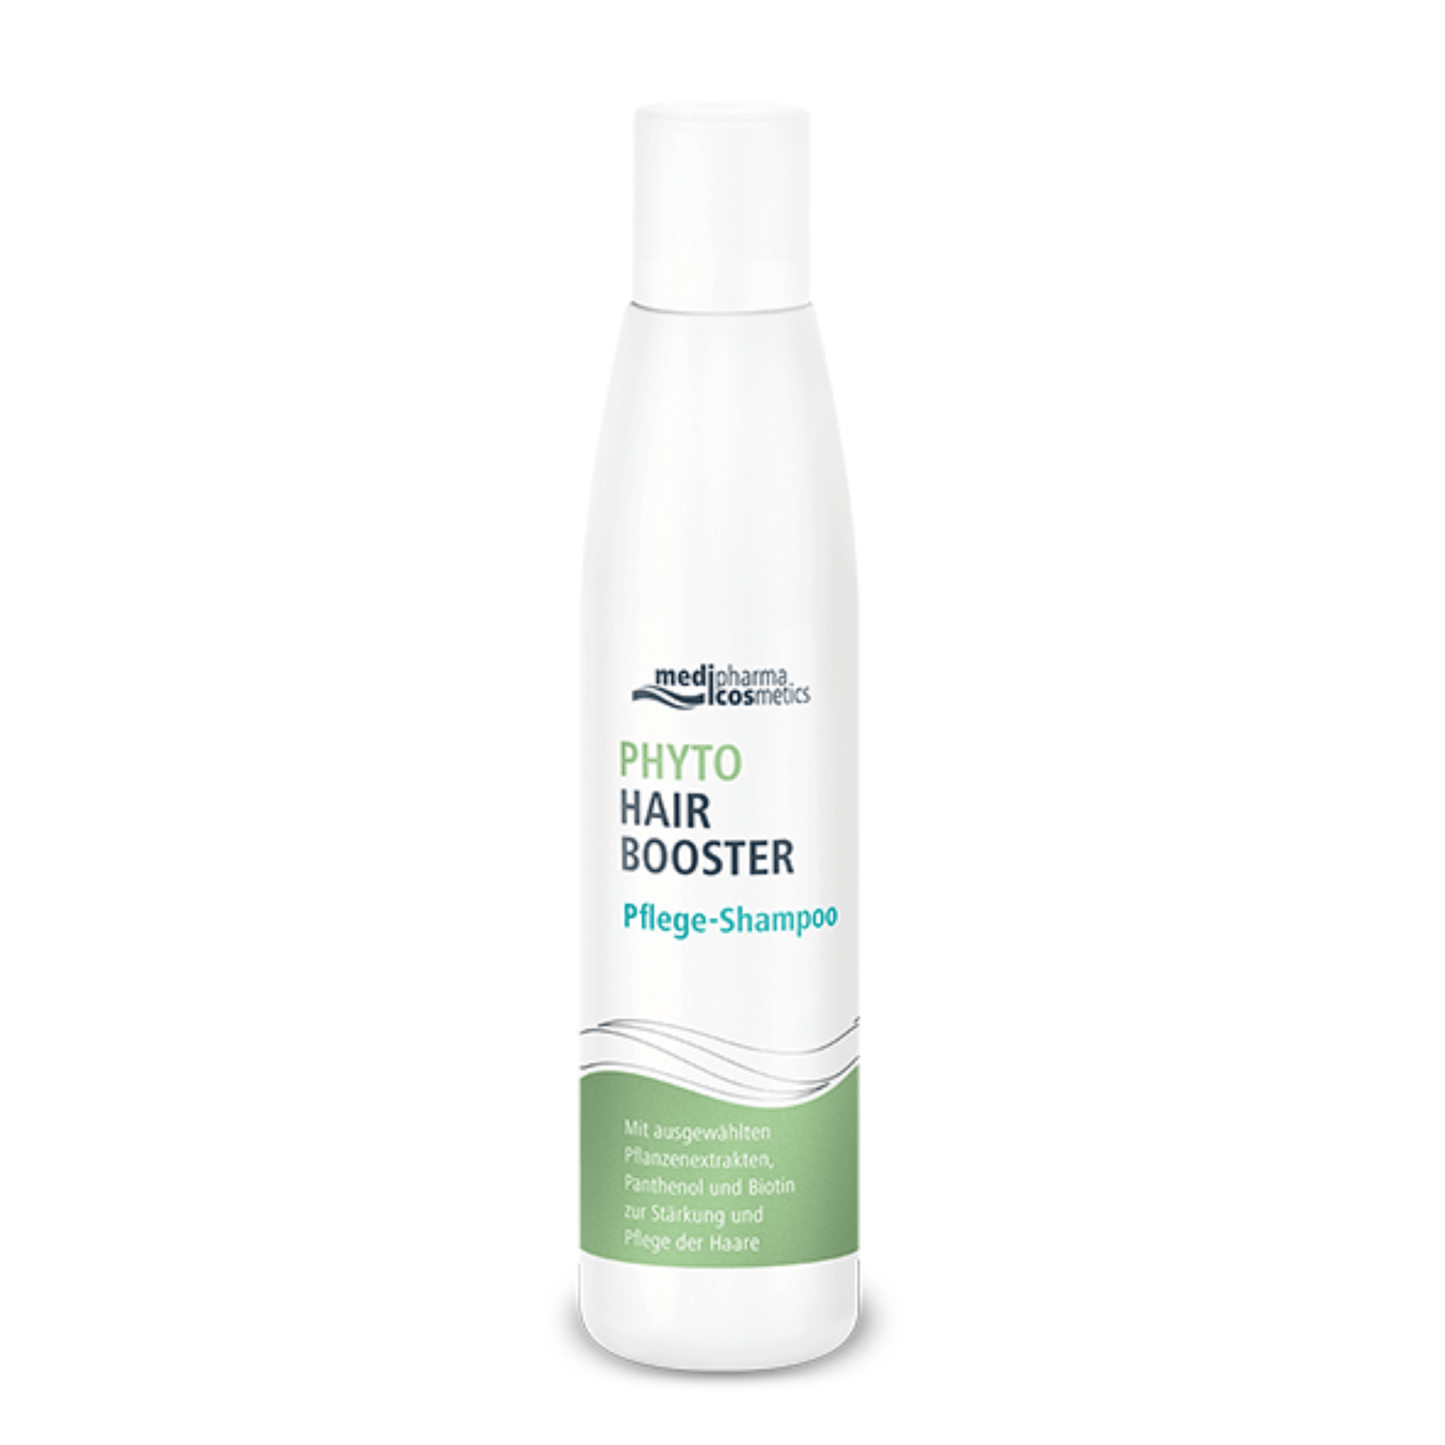 Primary Image of Phyto Hair Booster Shampoo